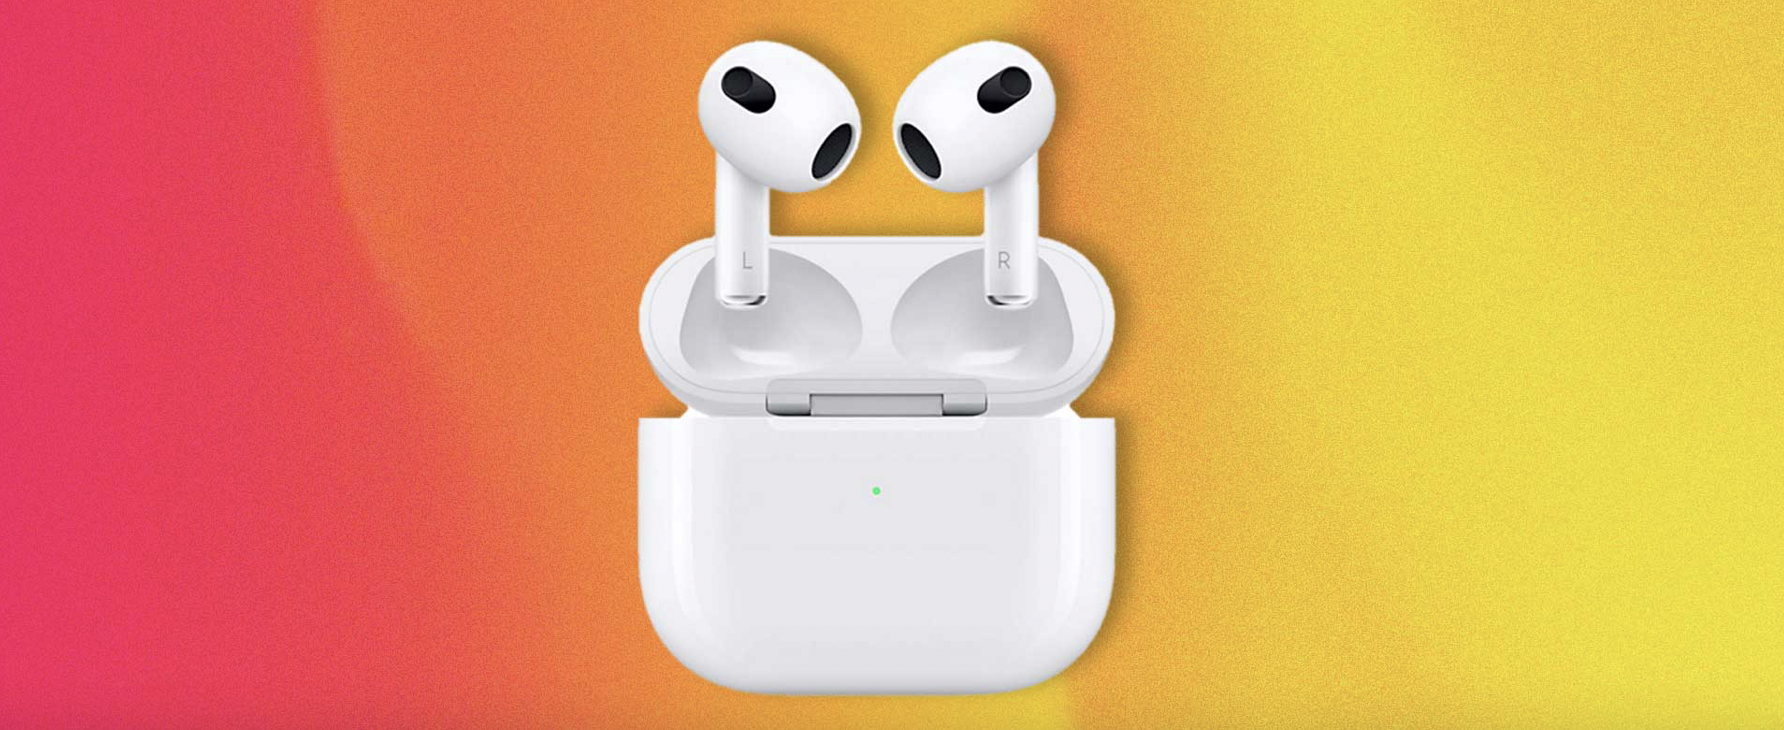 apple GQ discovers airpods